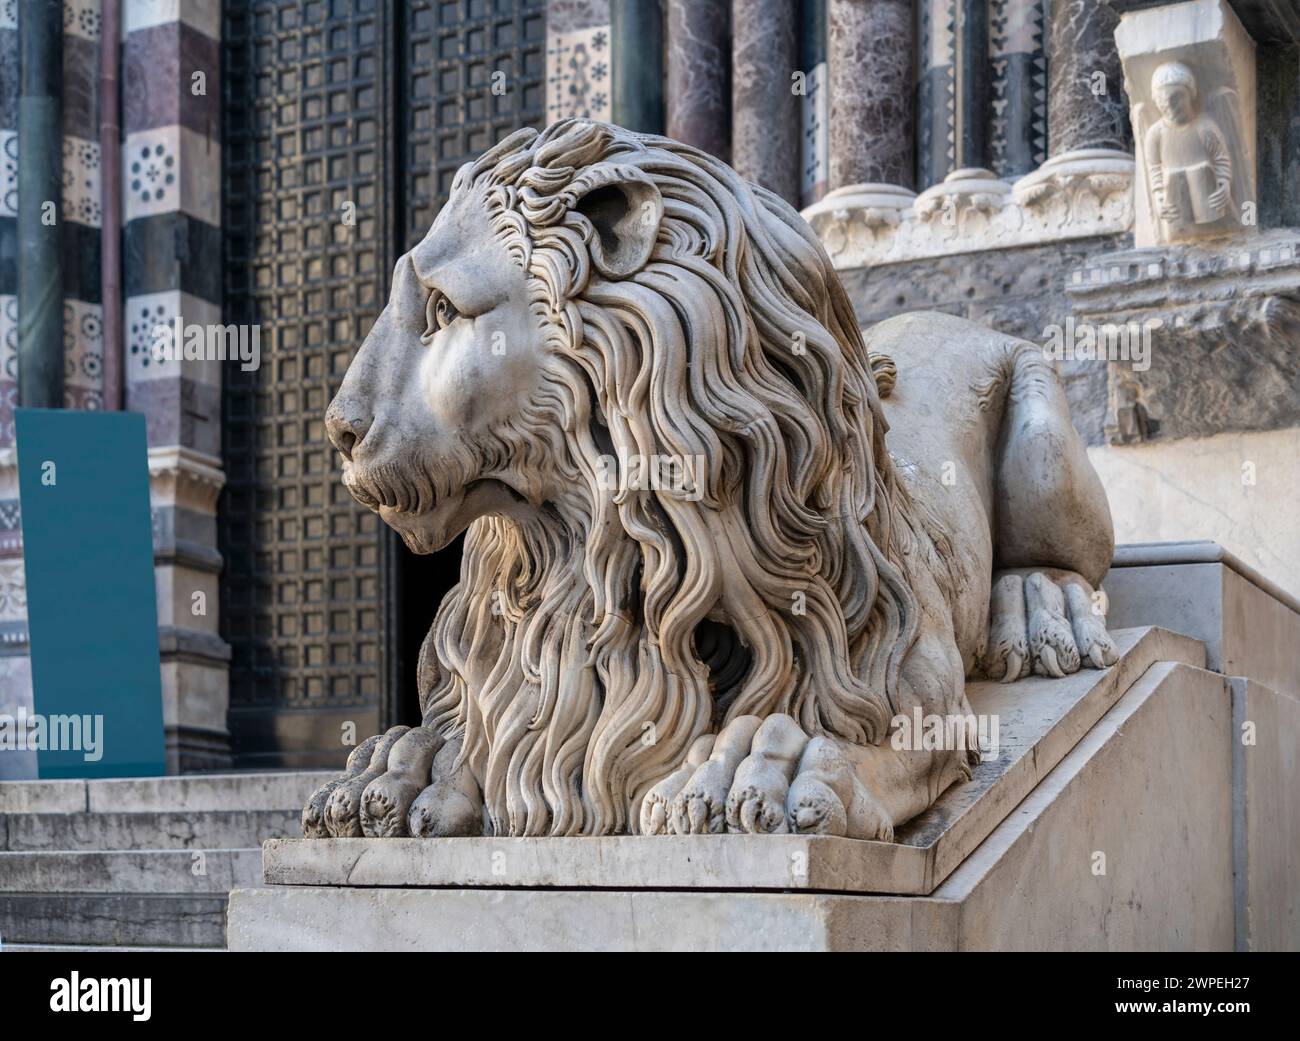 Lion sculpture near the cathedral in Genoa, the capital of the italian region of Liguria Stock Photo